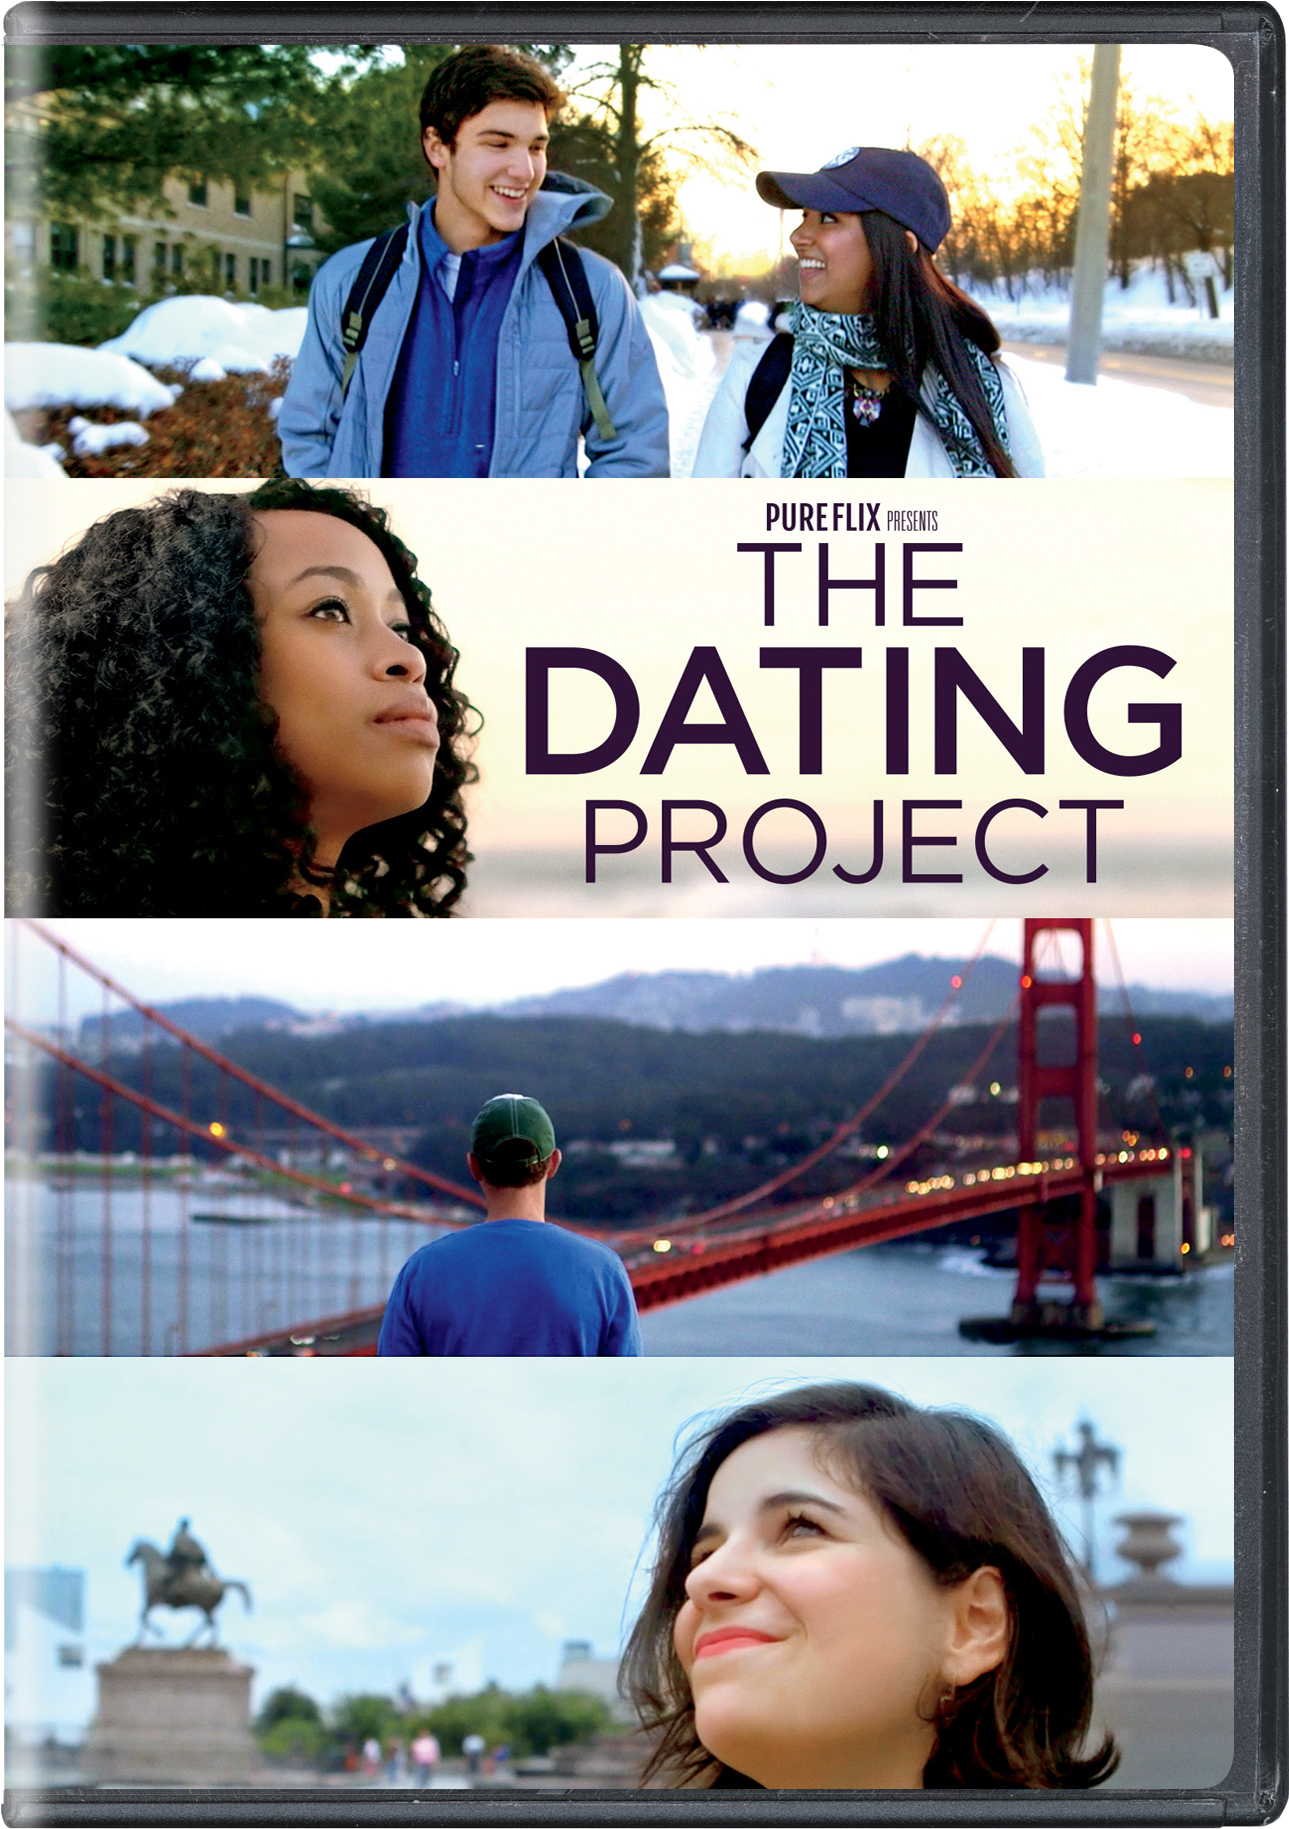 The Dating Project - DVD [ 2018 ]  - Documentaries On DVD